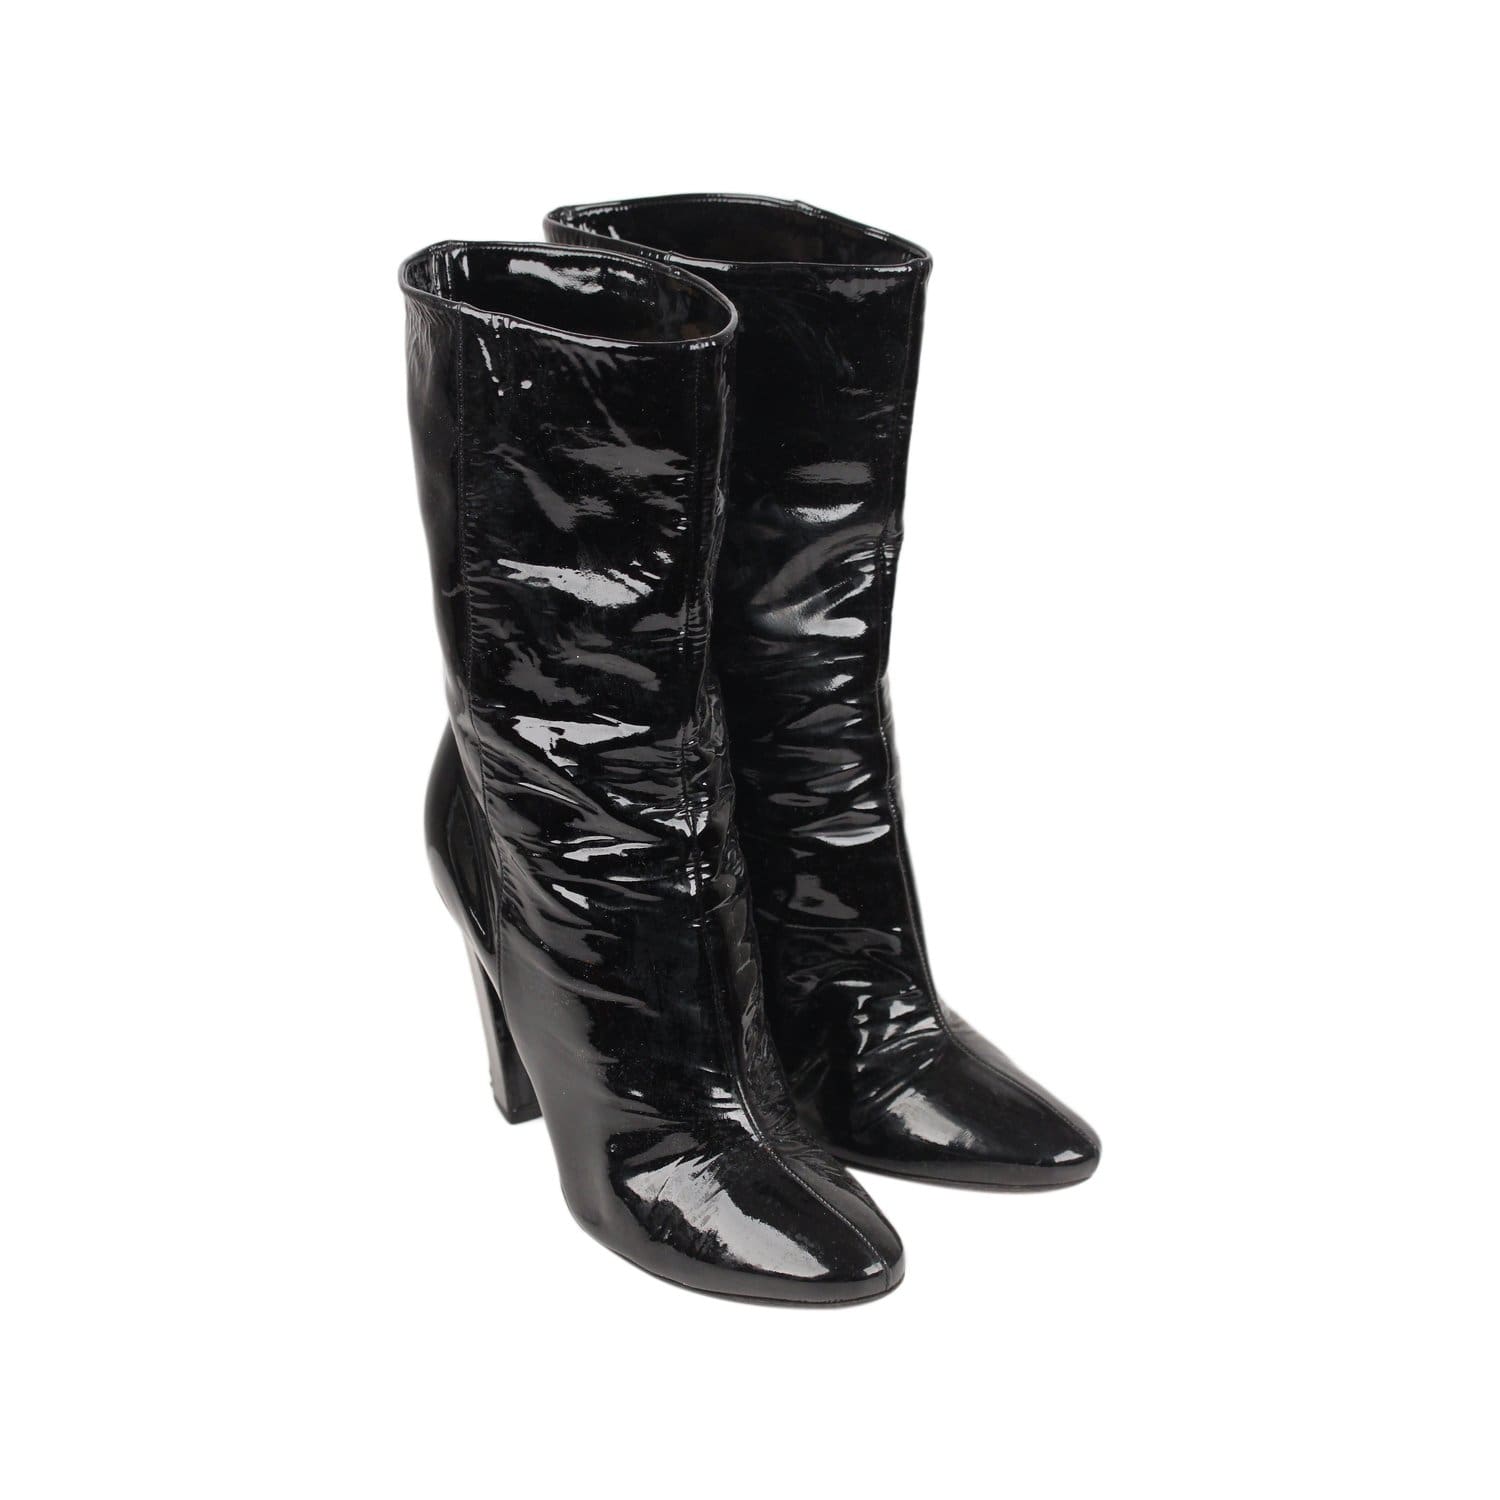 patent leather mid calf boots